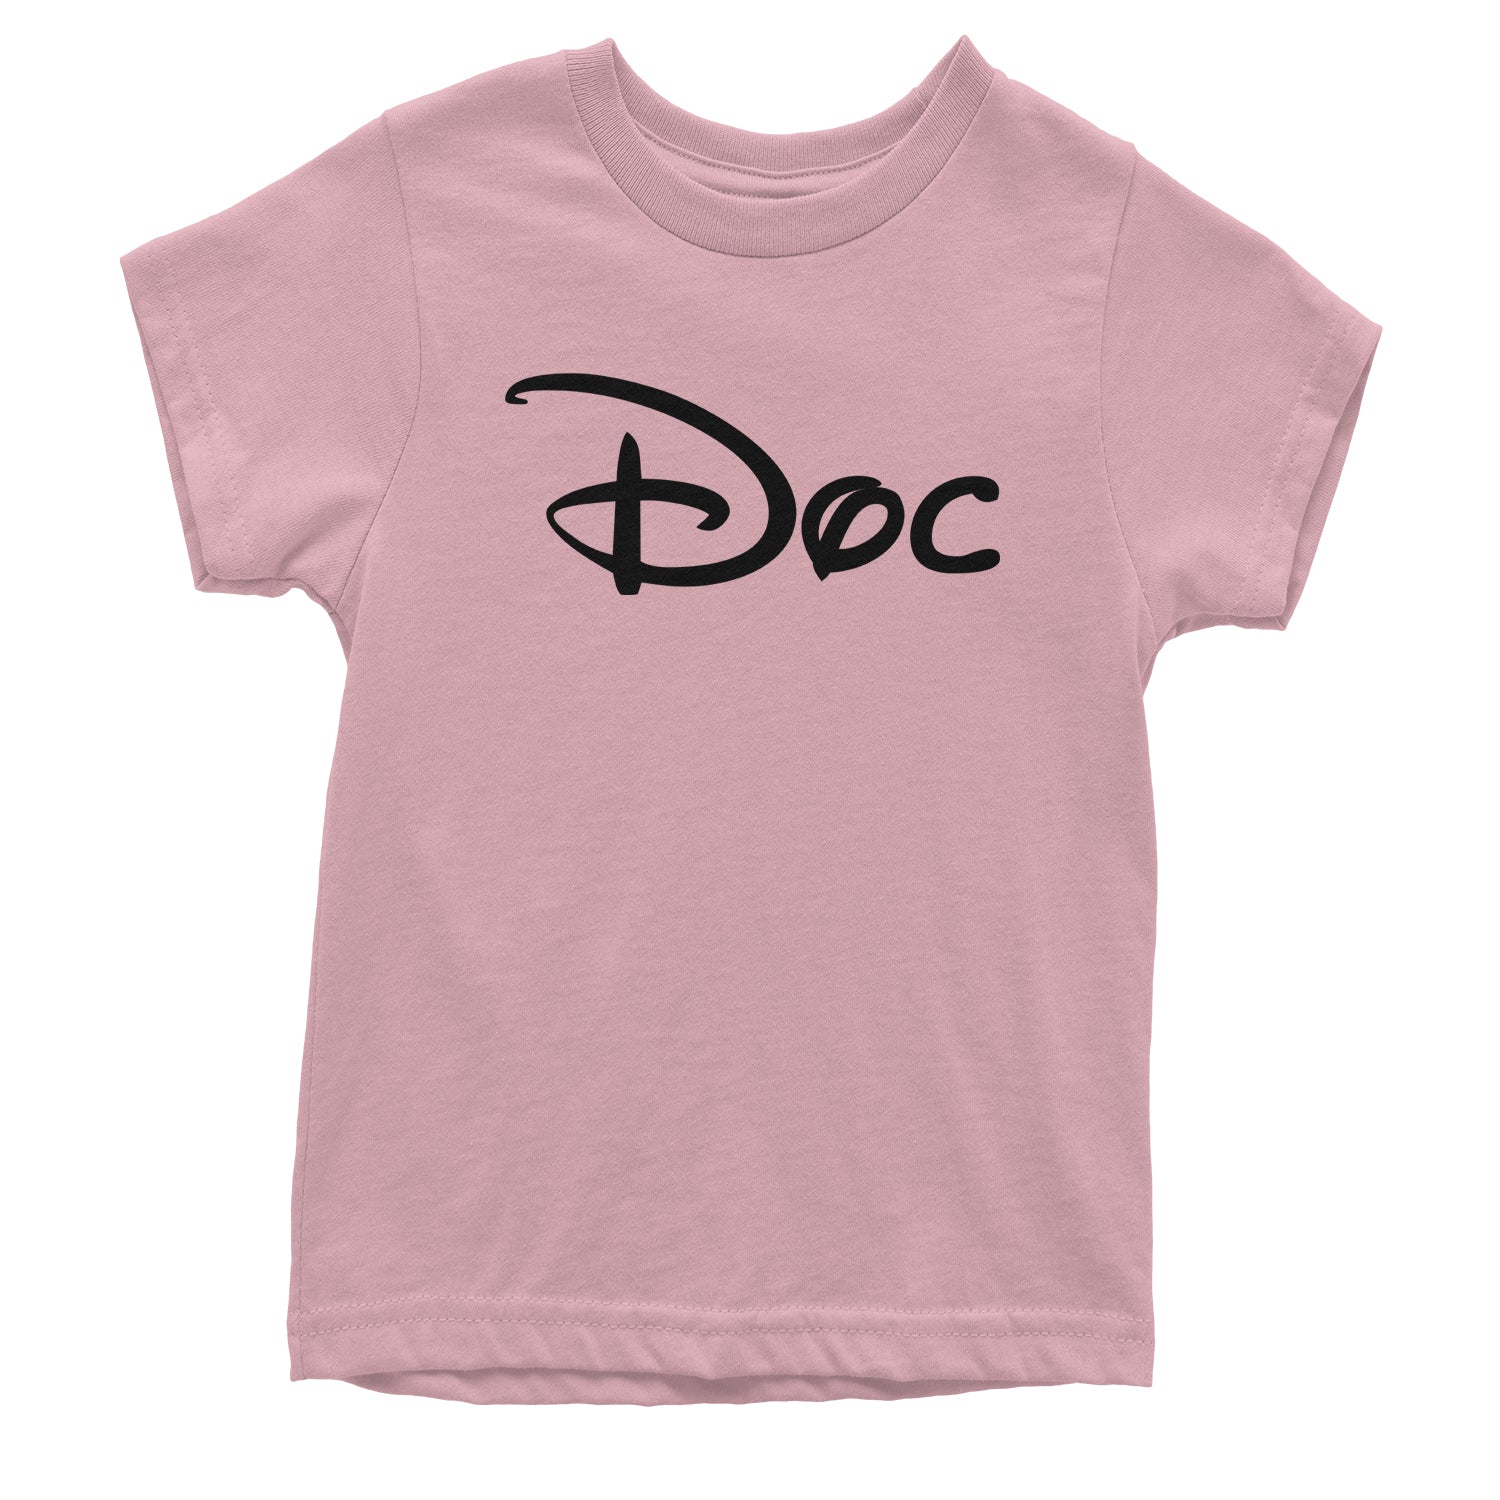 Doc - 7 Dwarfs Costume Youth T-shirt and, costume, dwarfs, group, halloween, matching, seven, snow, the, white by Expression Tees